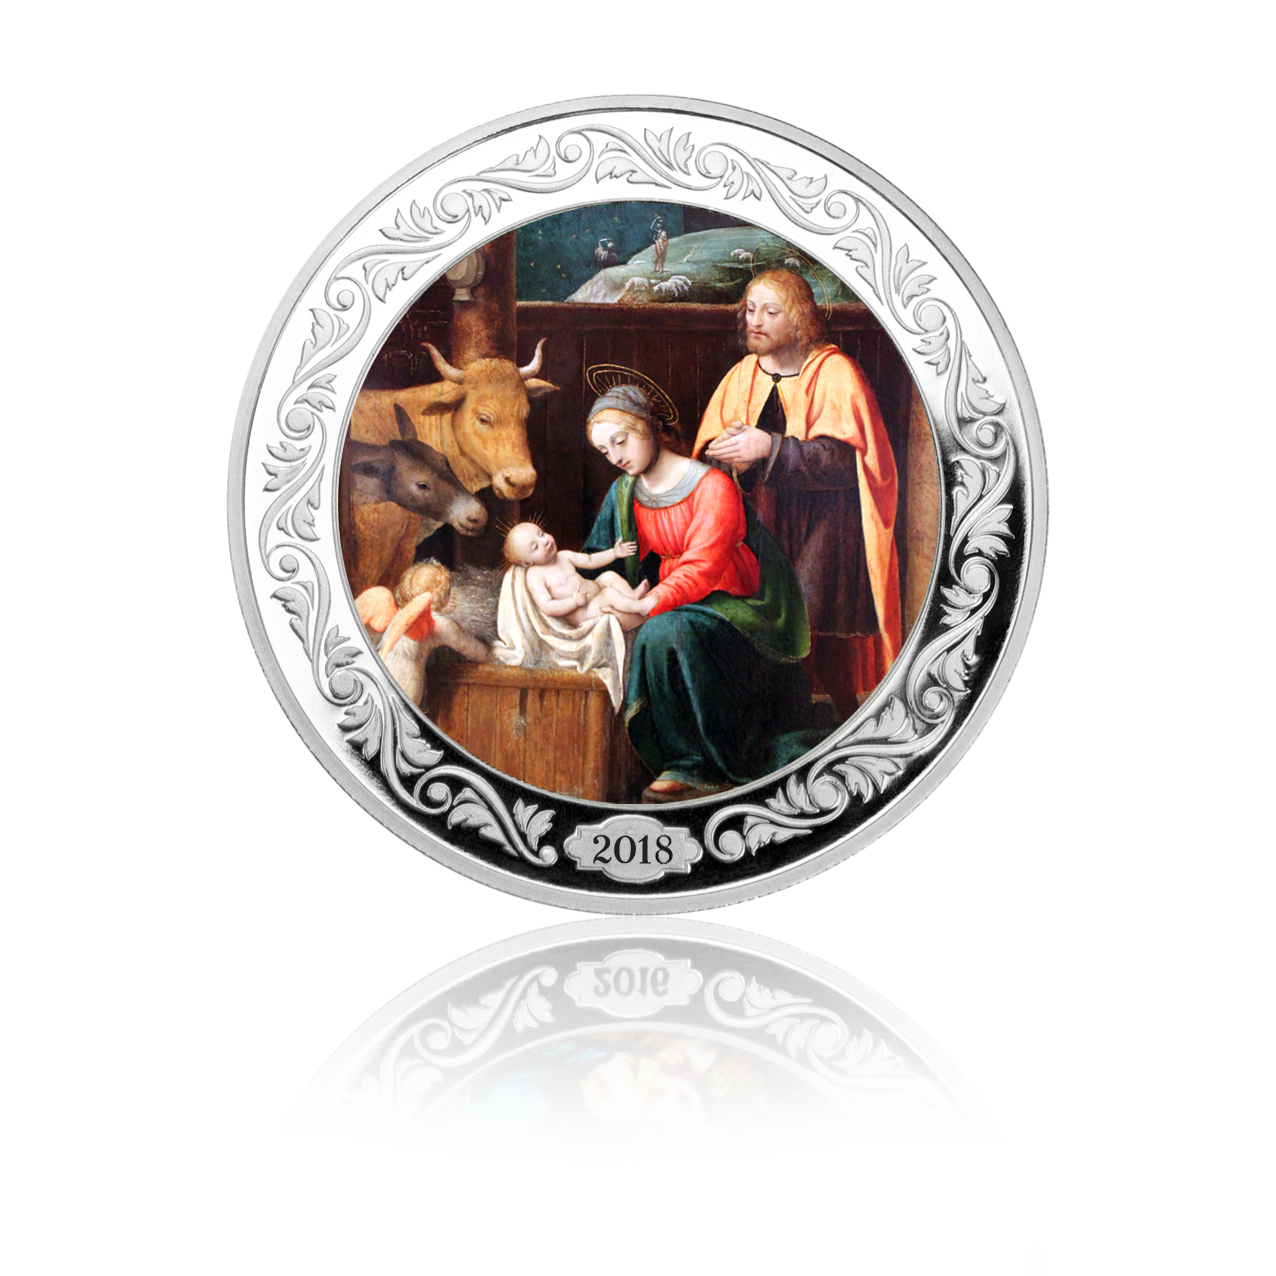 Christmas medal 2018 „The birth of Christ“ - 1/2 oz silver with coloration